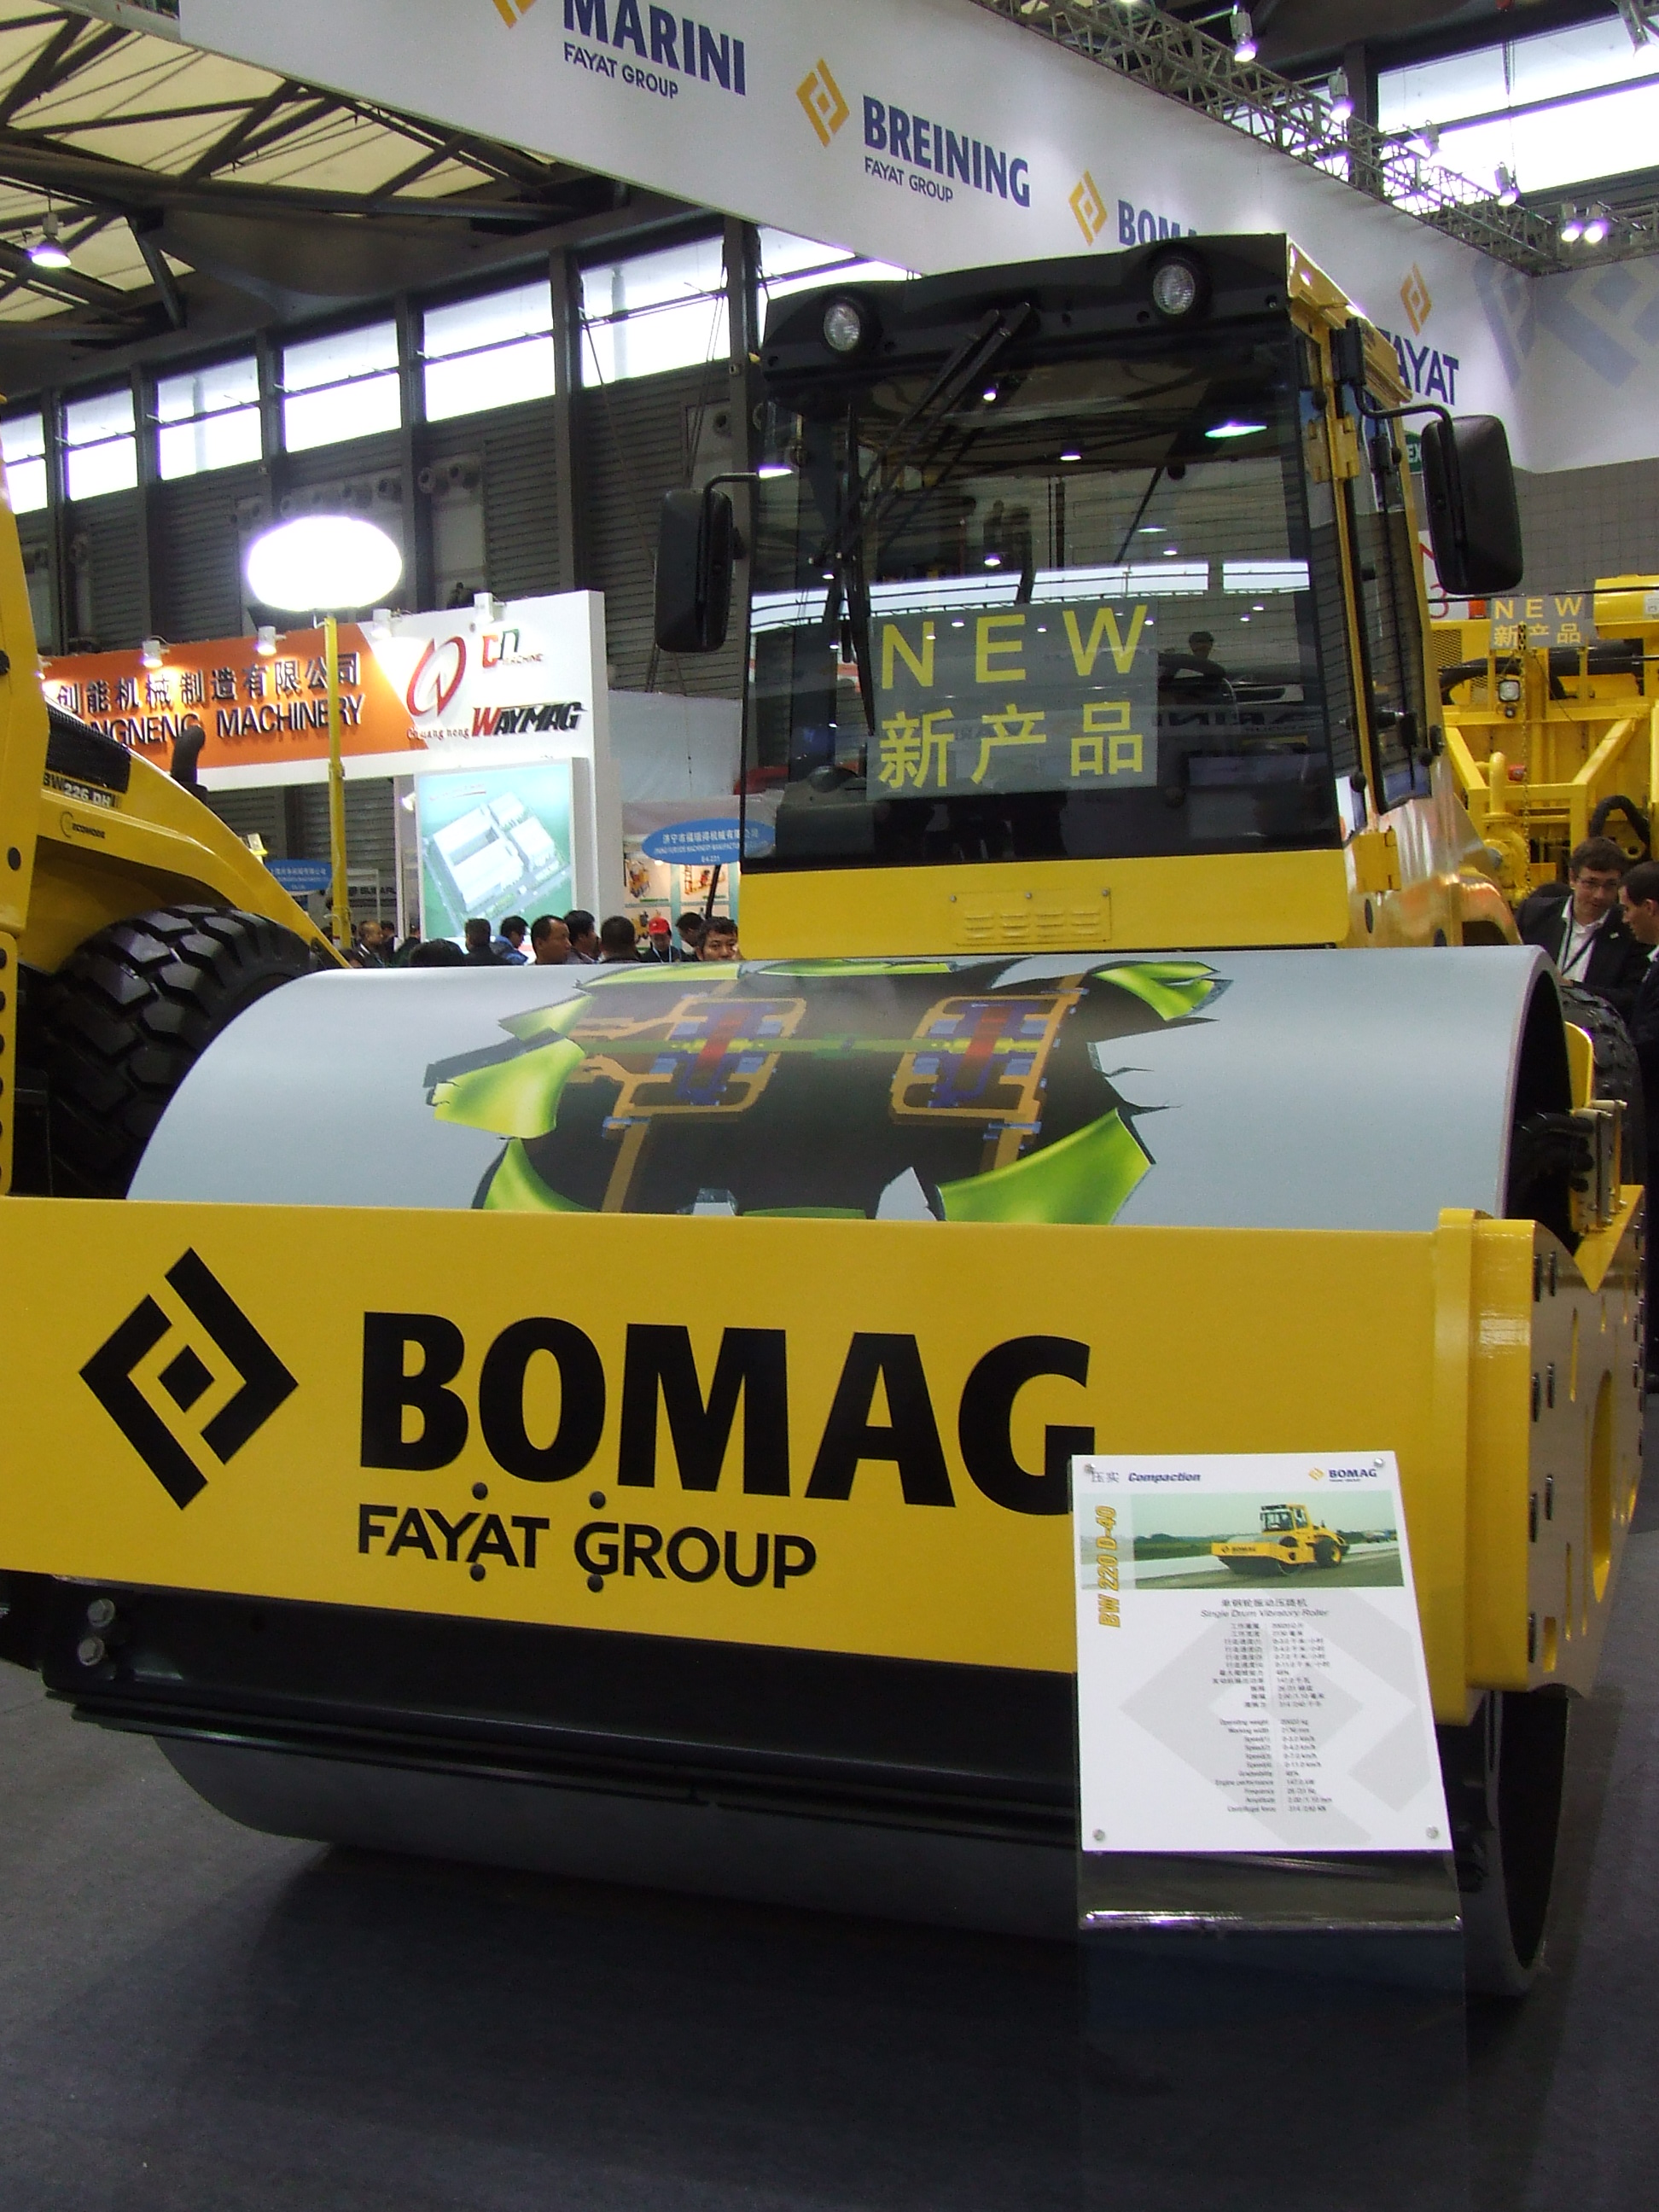 Bomag The BW220-D4 soil compactor